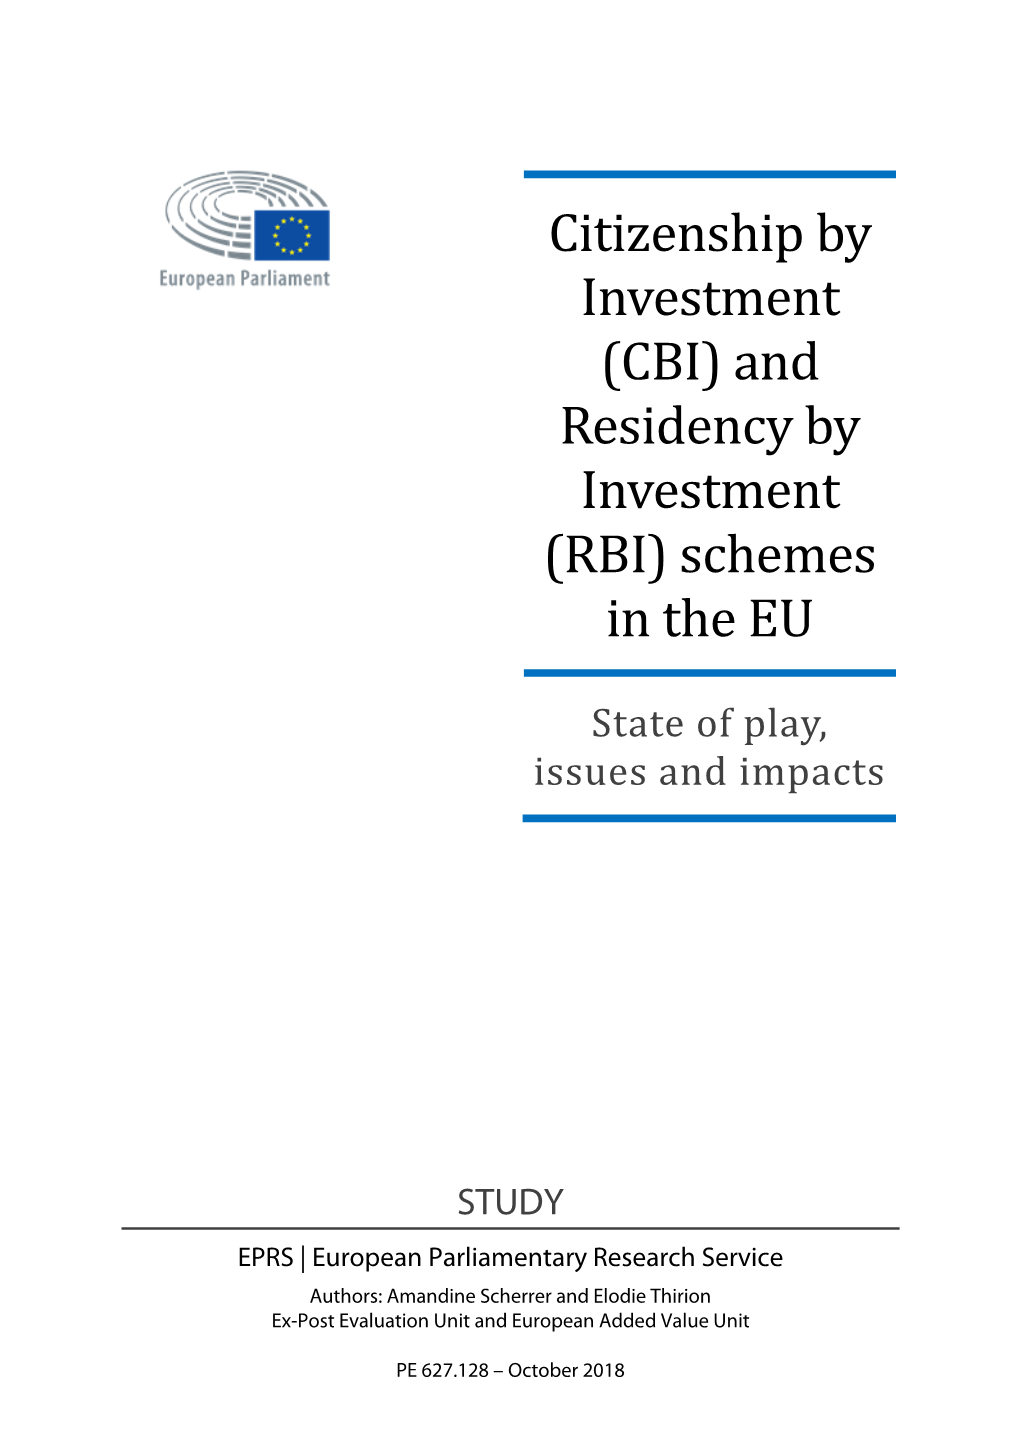 Citizenship by Investment (CBI) and Residency by Investment (RBI) Schemes in the EU